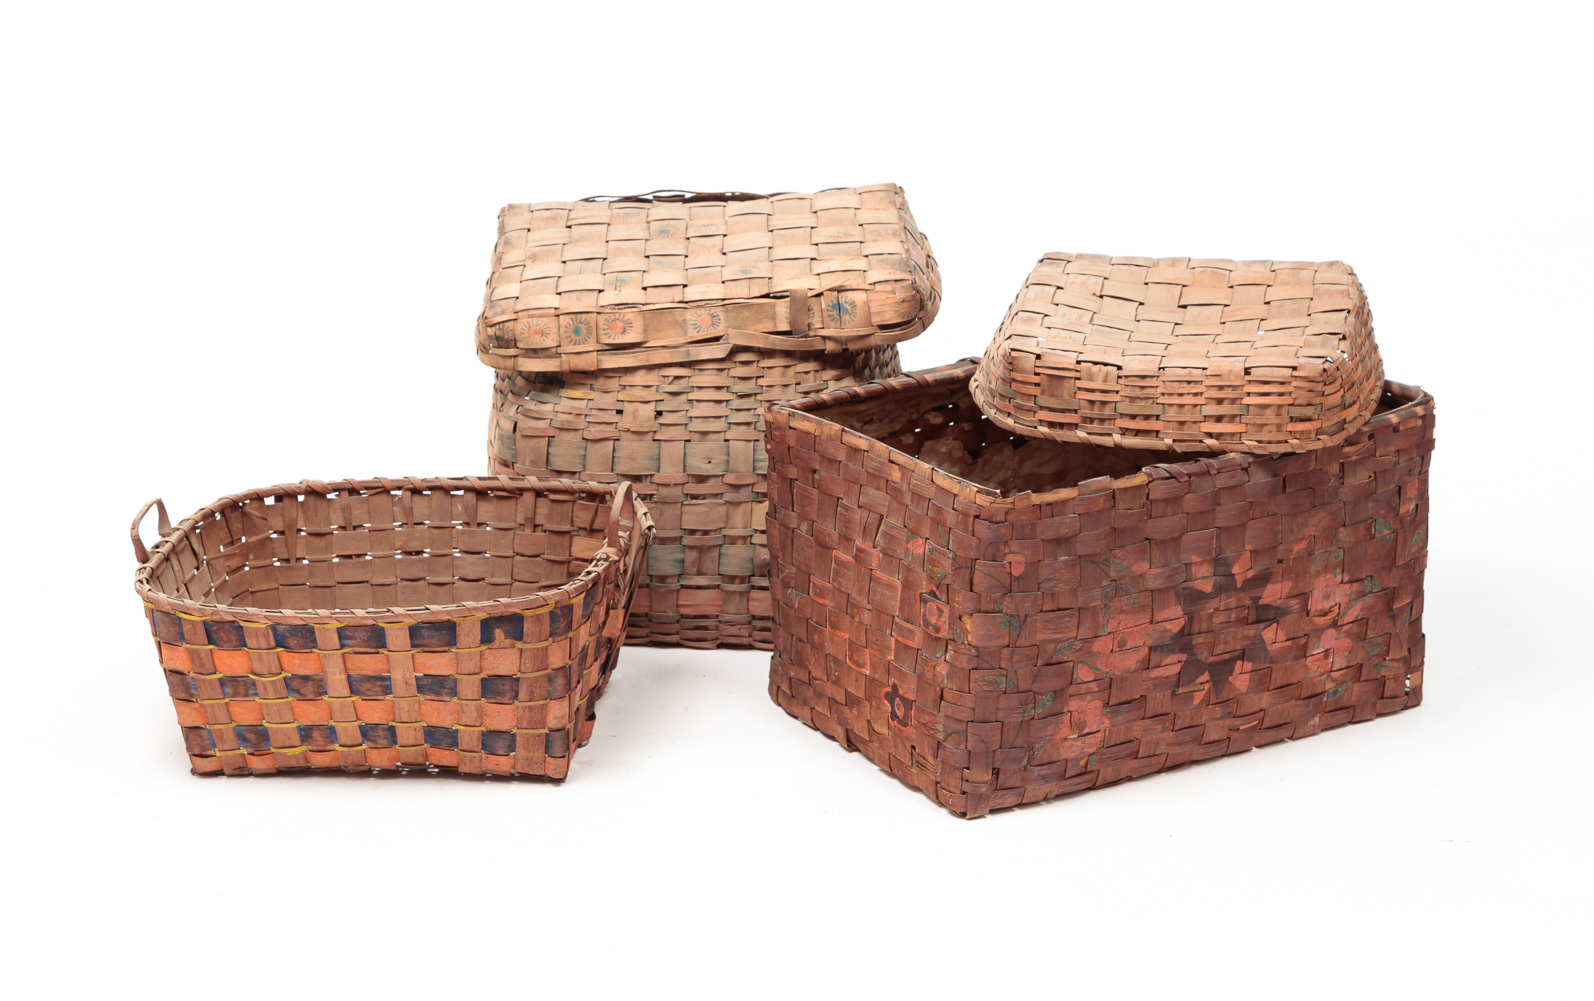 THREE AMERICAN DECORATED BASKETS. Early